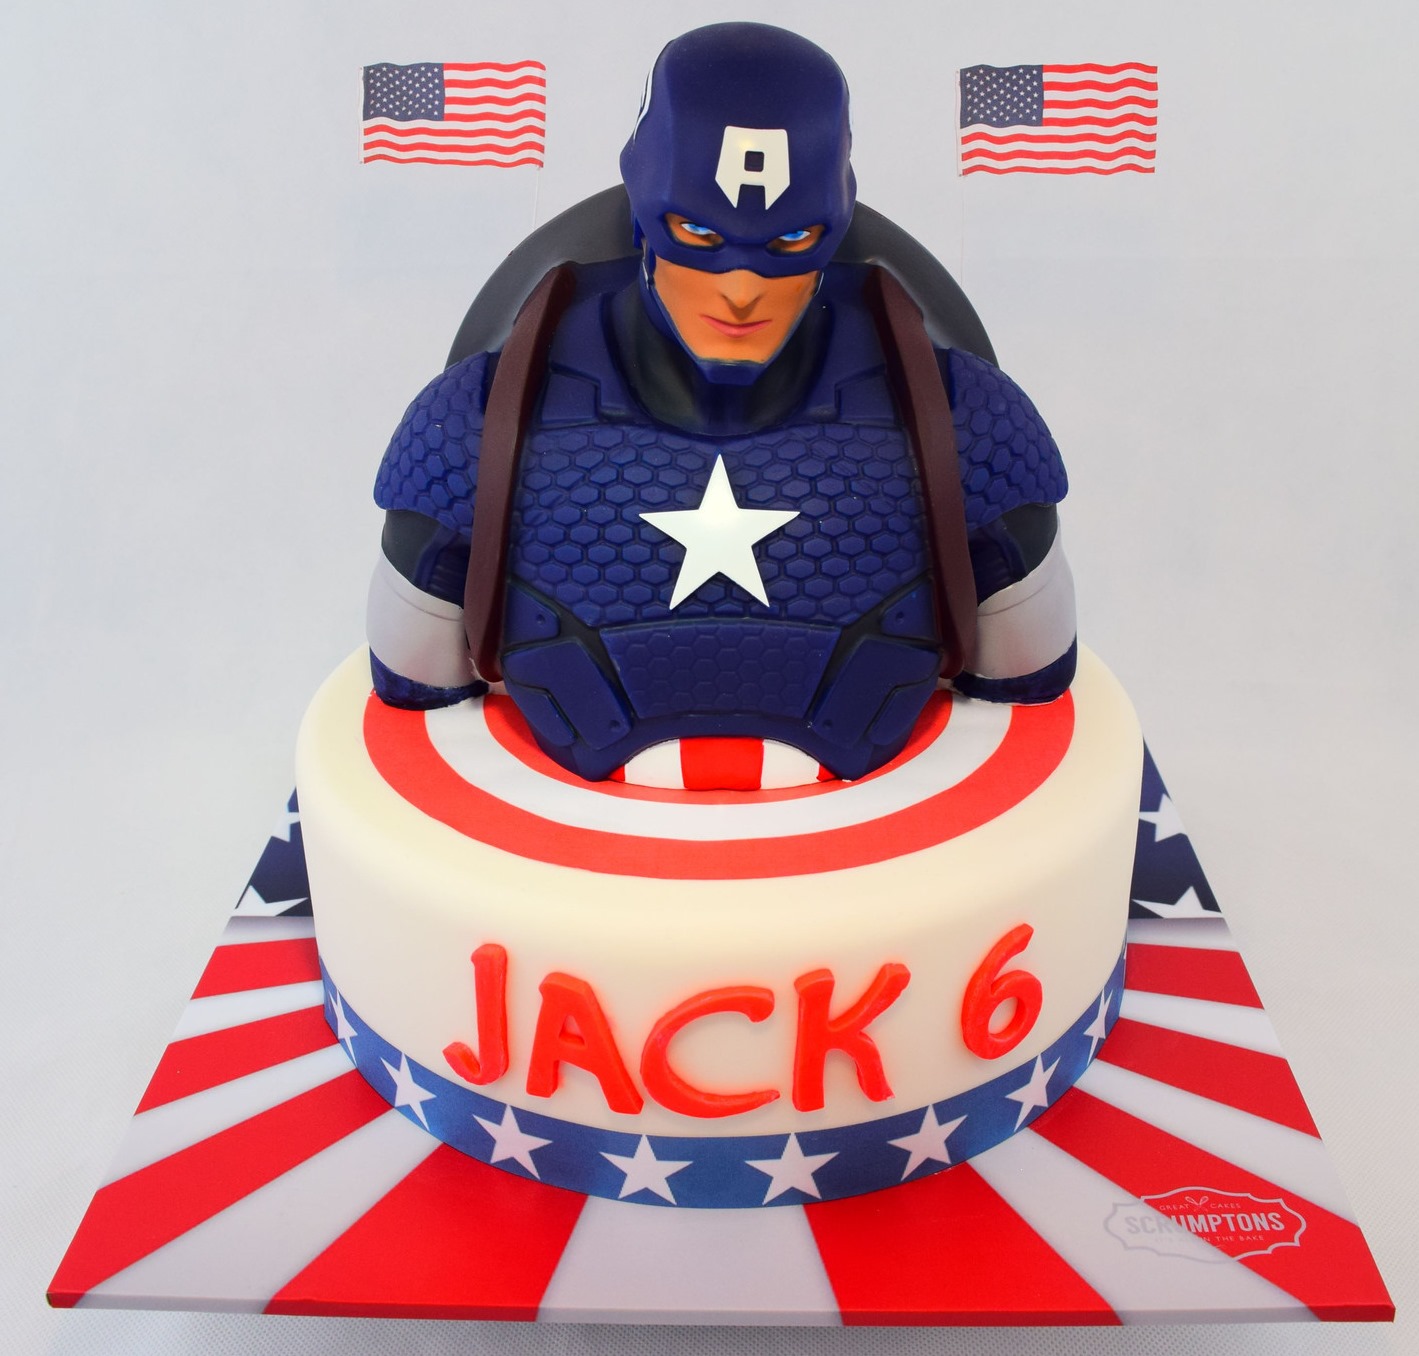 Captain America Birthday Cake at Low Price & Free Delivery